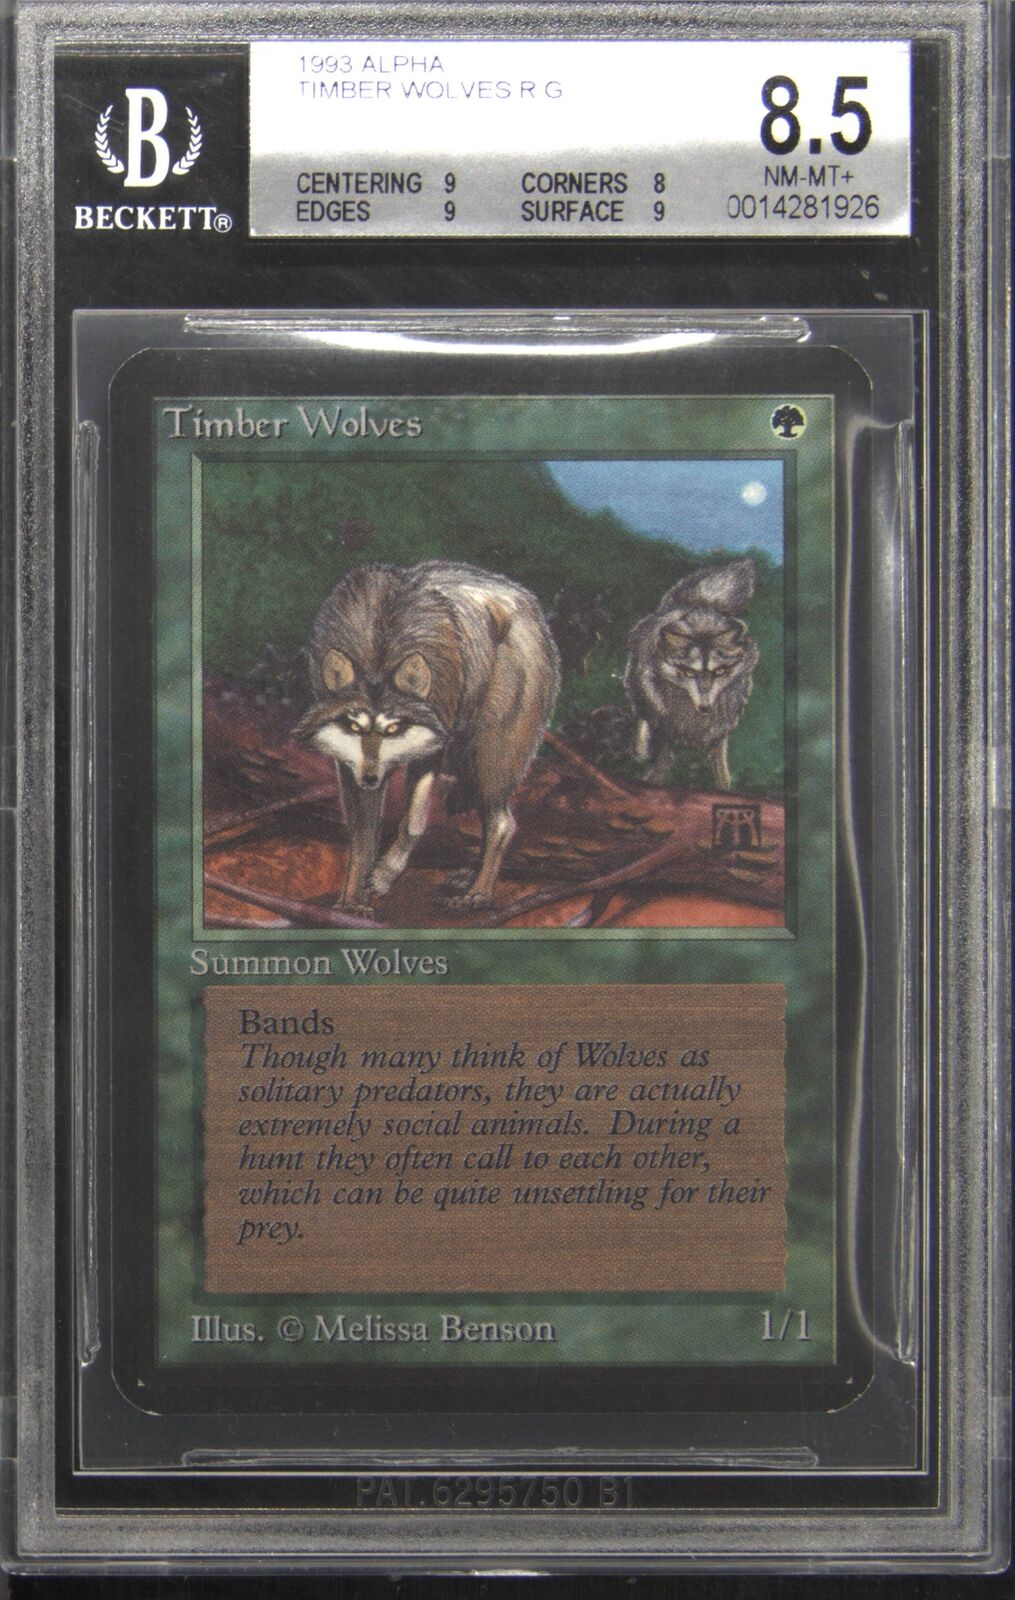 1993 Alpha Timber Wolves Rare Magic: The Gathering Card BGS 8.5